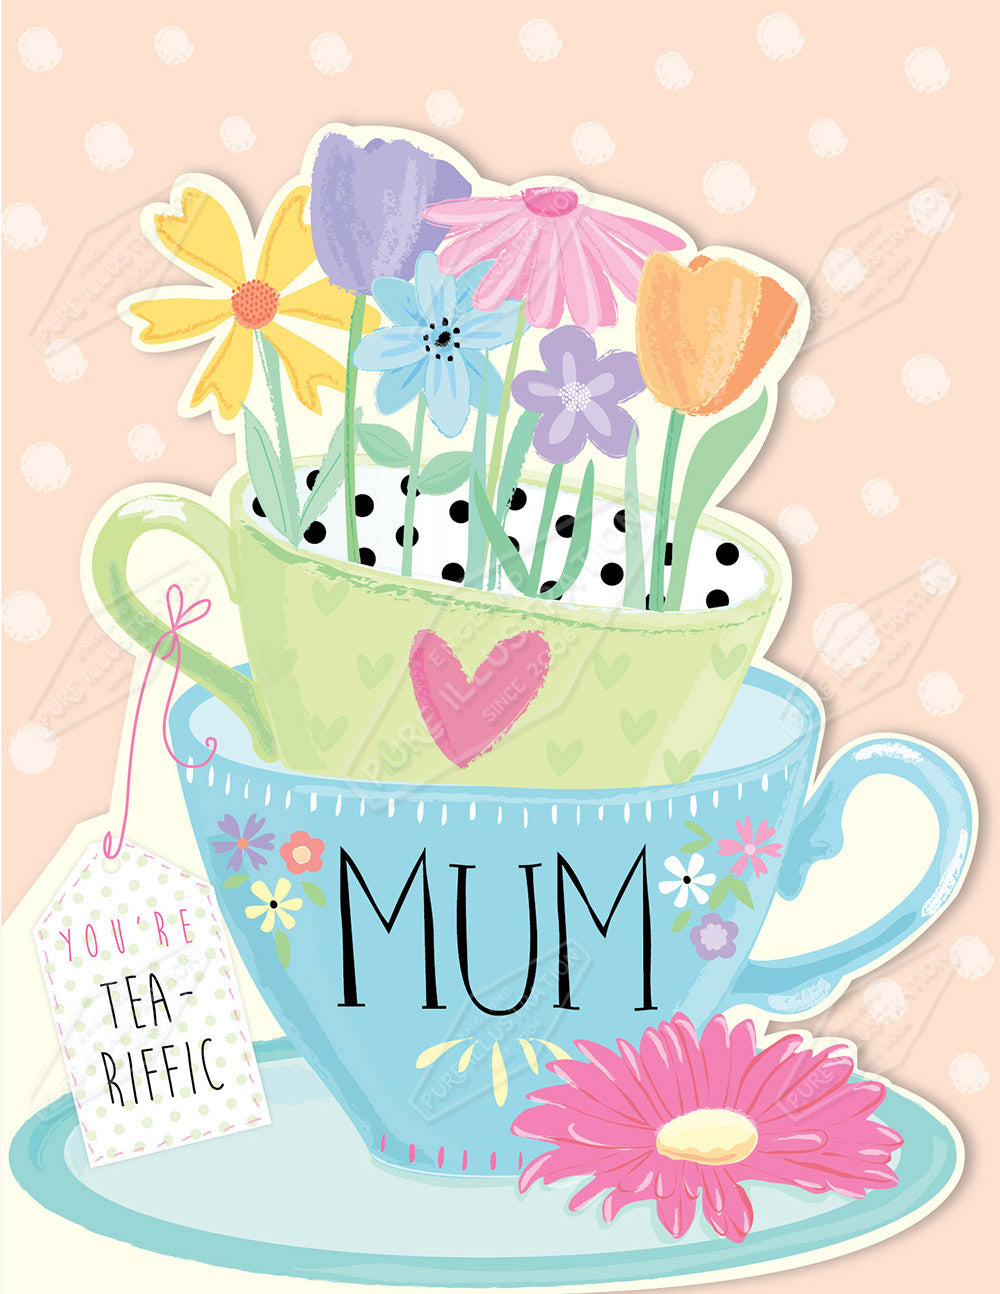 00032534AMC - Amanda McDonough is represented by Pure Art Licensing Agency - Mother's Day Greeting Card Design